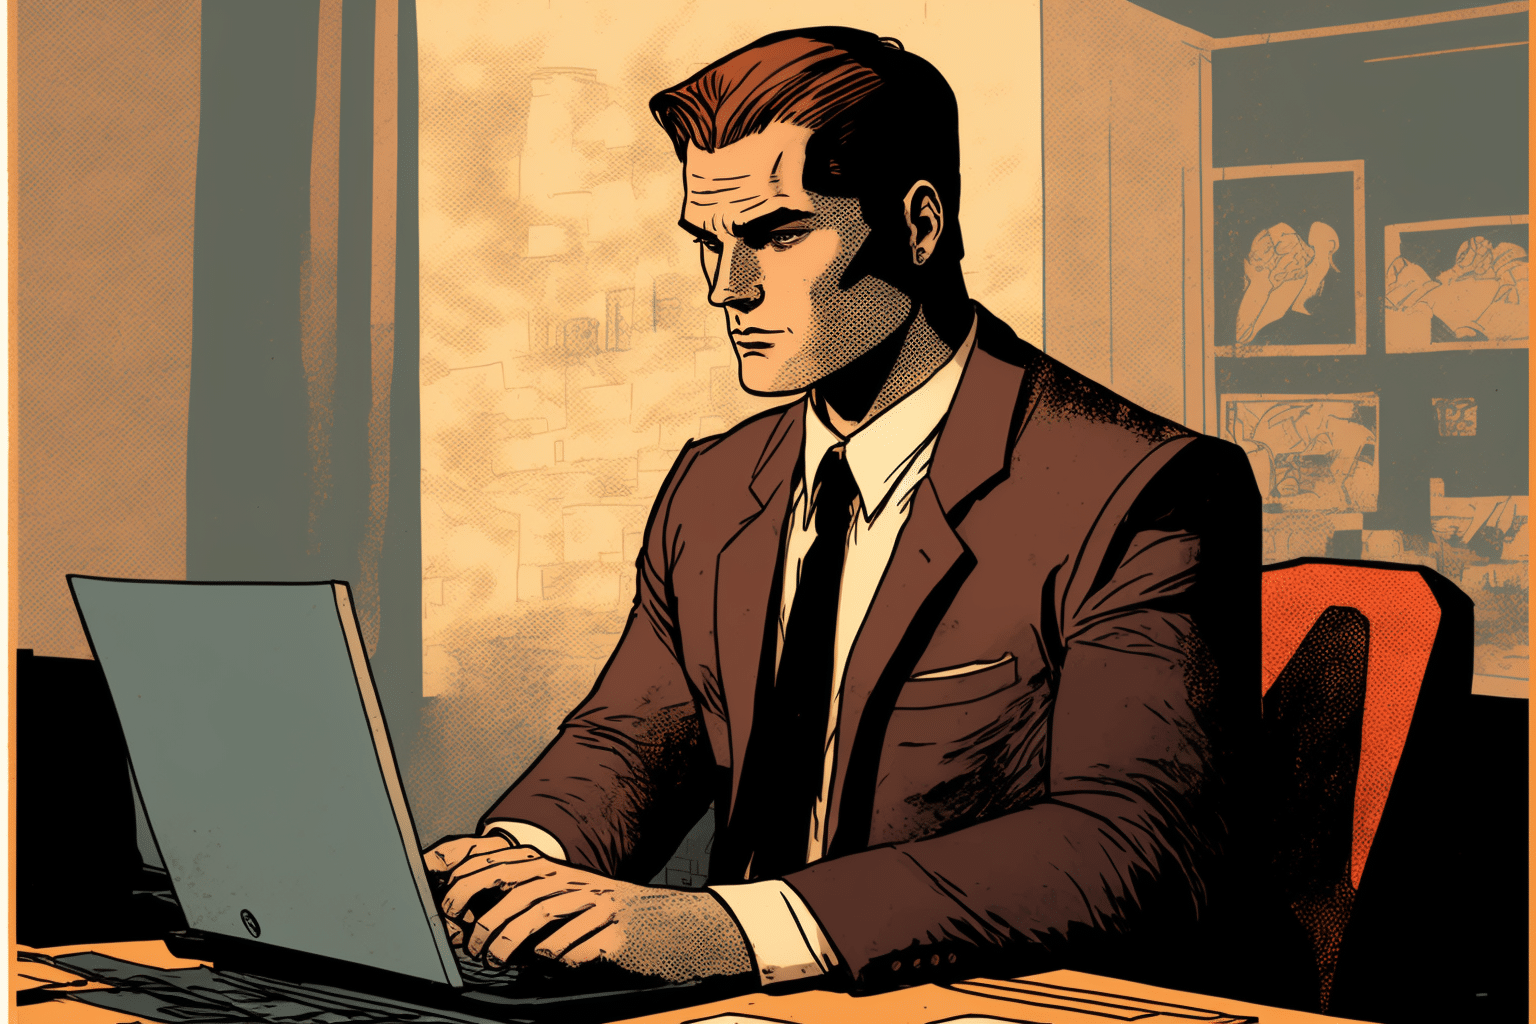 HROS_a_man_in_a_suit_posting_a_job_on_computer_comic_book_style